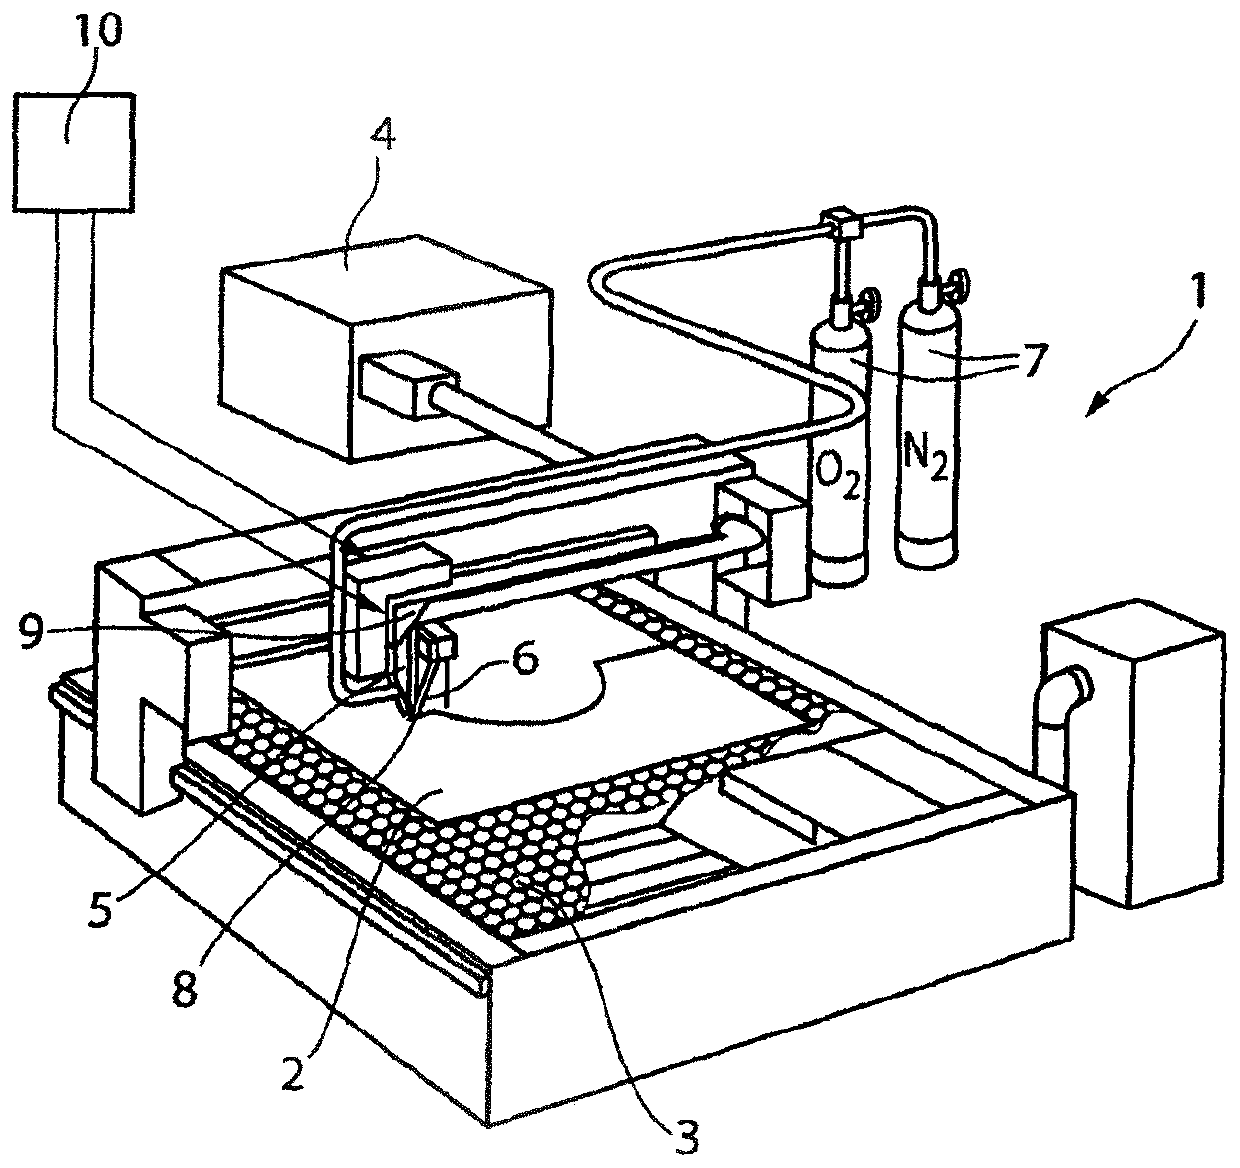 Method for cutting a workpiece using a laser beam